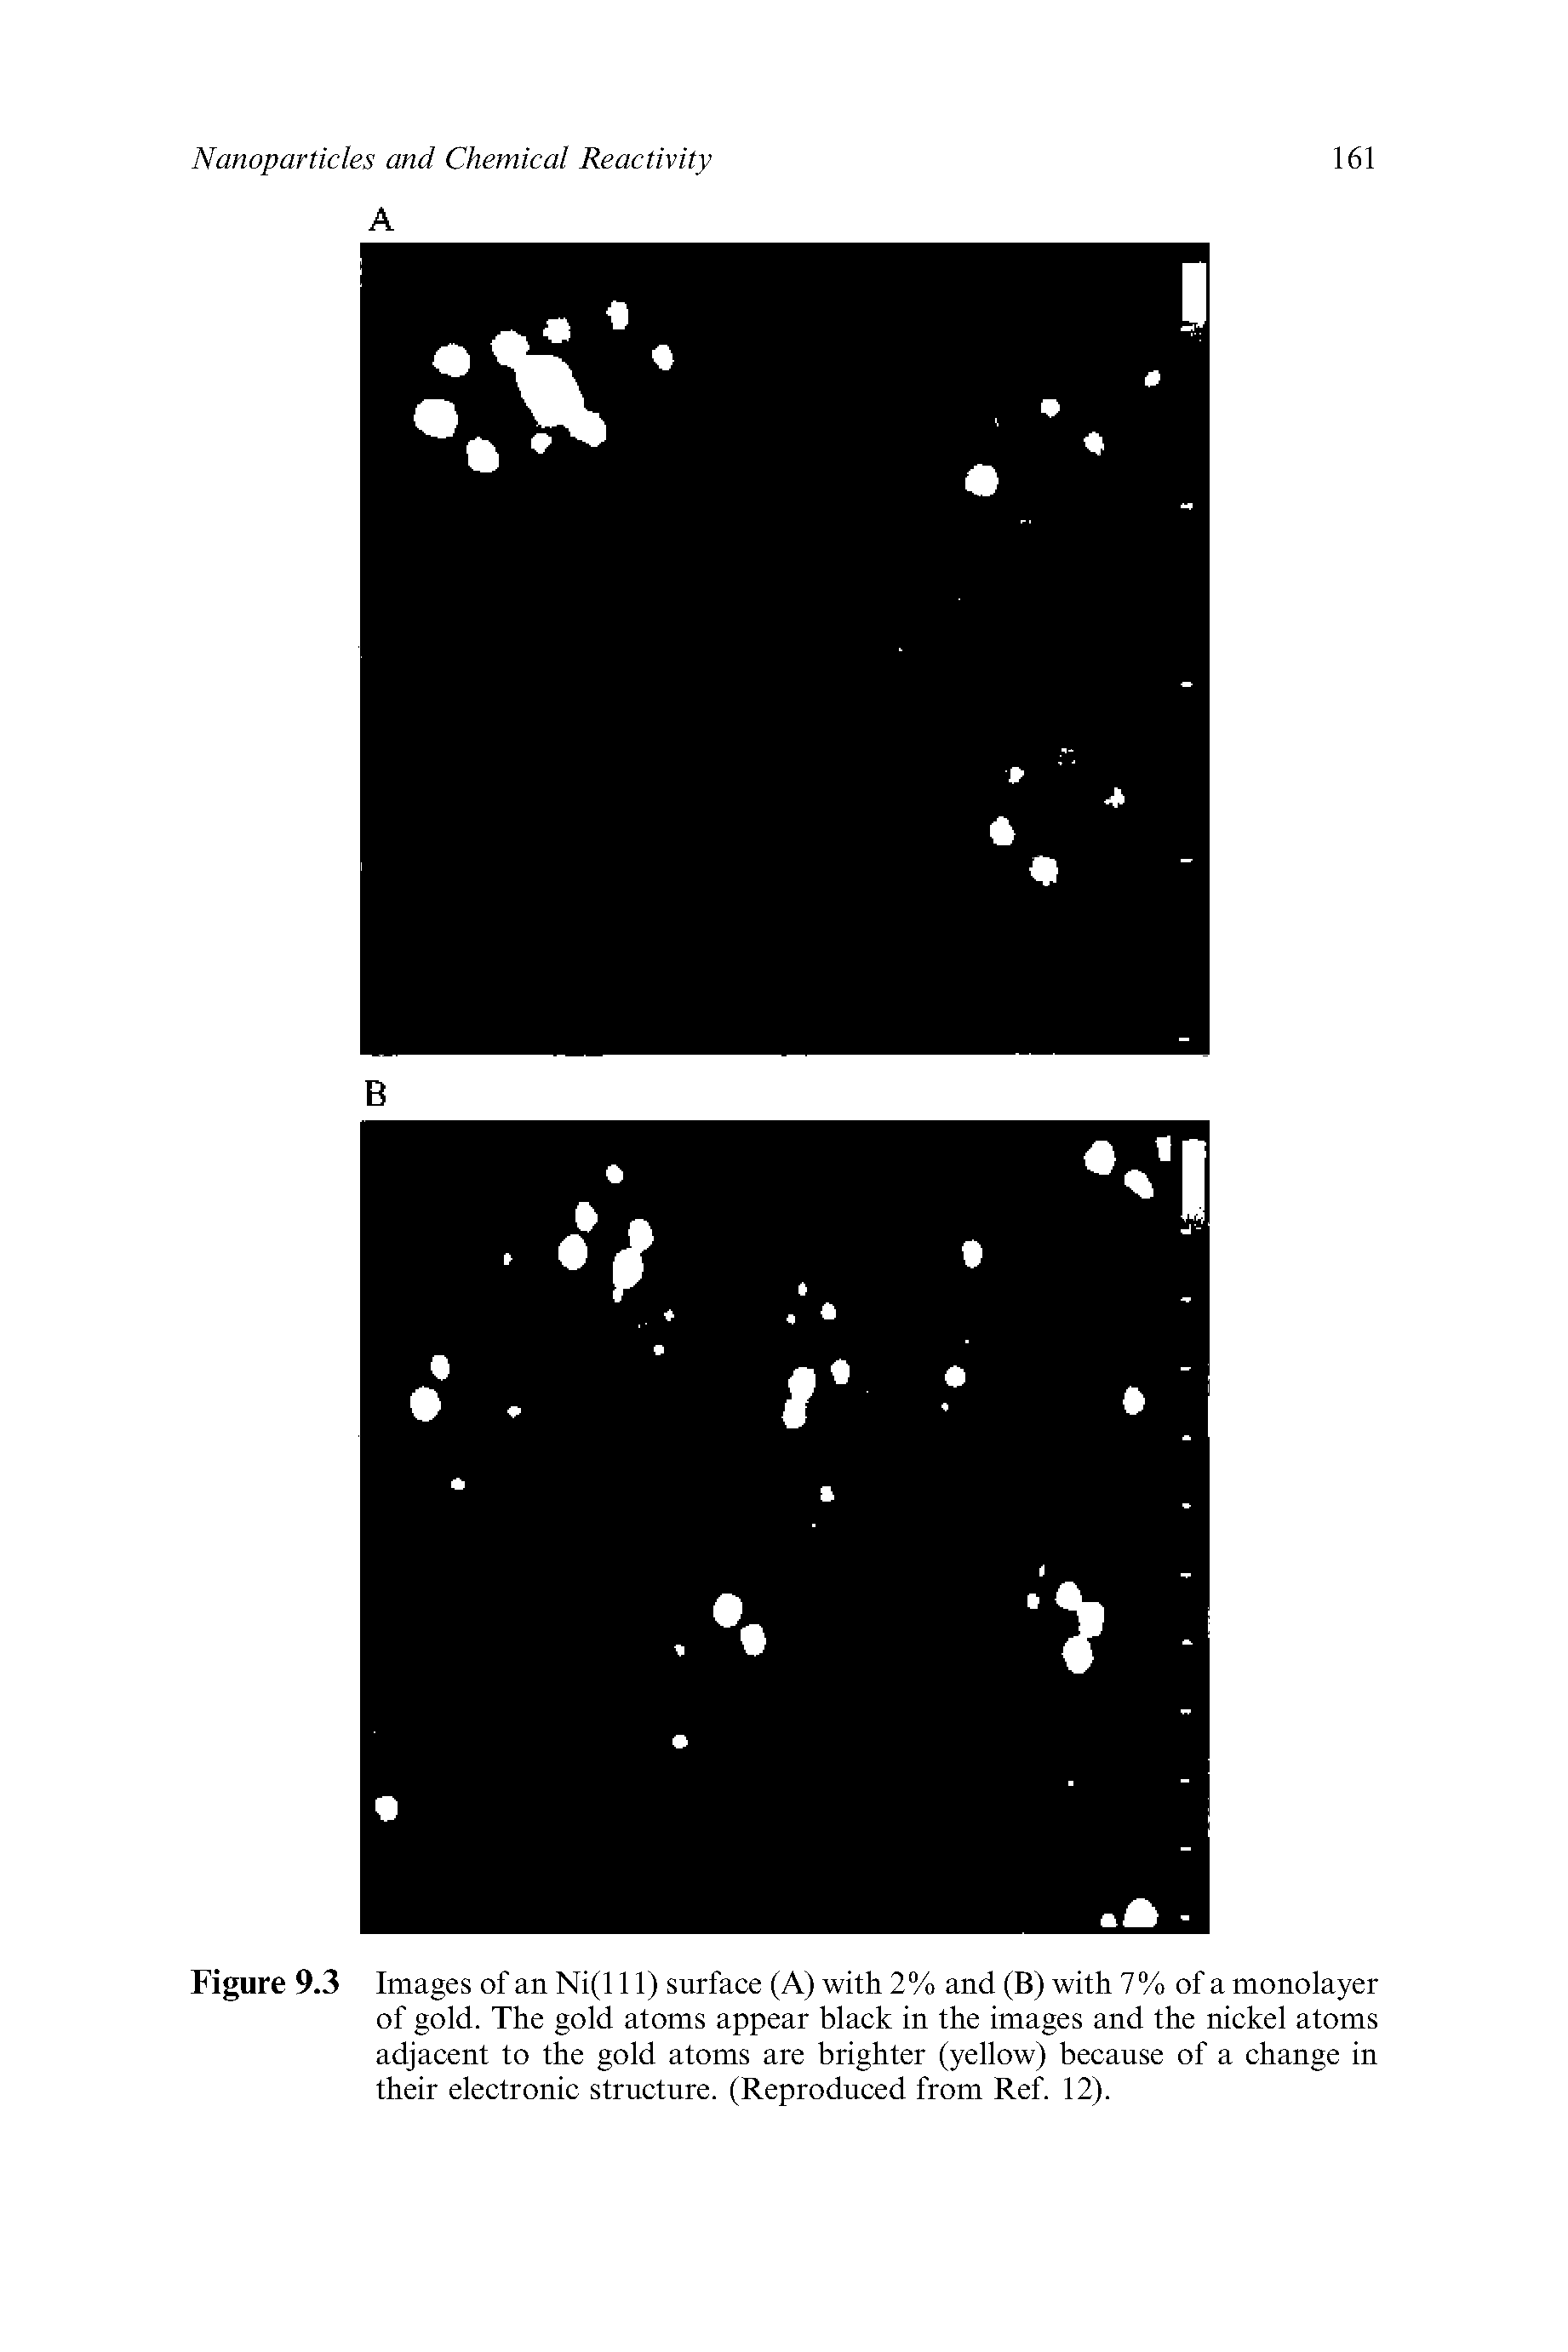 Figure 9.3 Images of an Ni(l 11) surface (A) with 2% and (B) with 7% of a monolayer of gold. The gold atoms appear black in the images and the nickel atoms adjacent to the gold atoms are brighter (yellow) because of a change in their electronic structure. (Reproduced from Ref. 12).